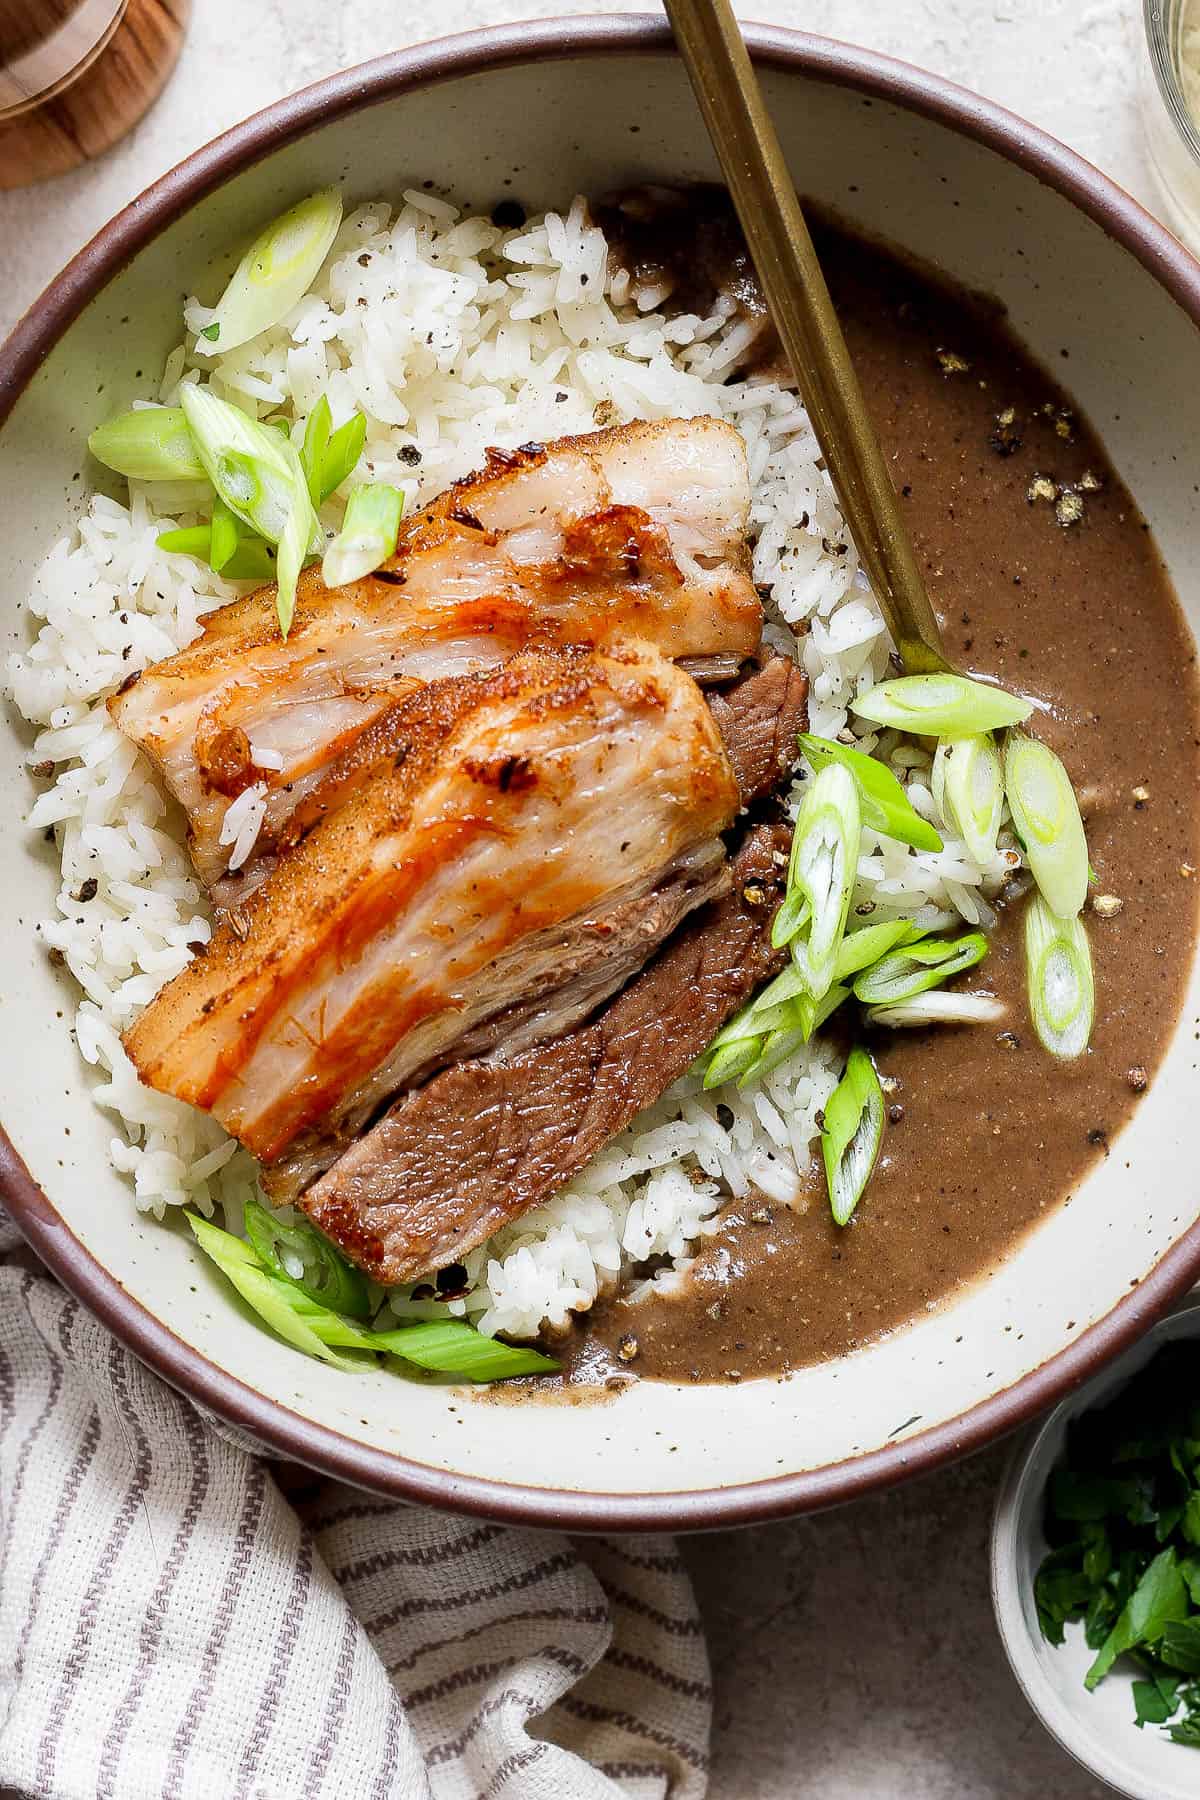 A great recipe for braised pork belly.